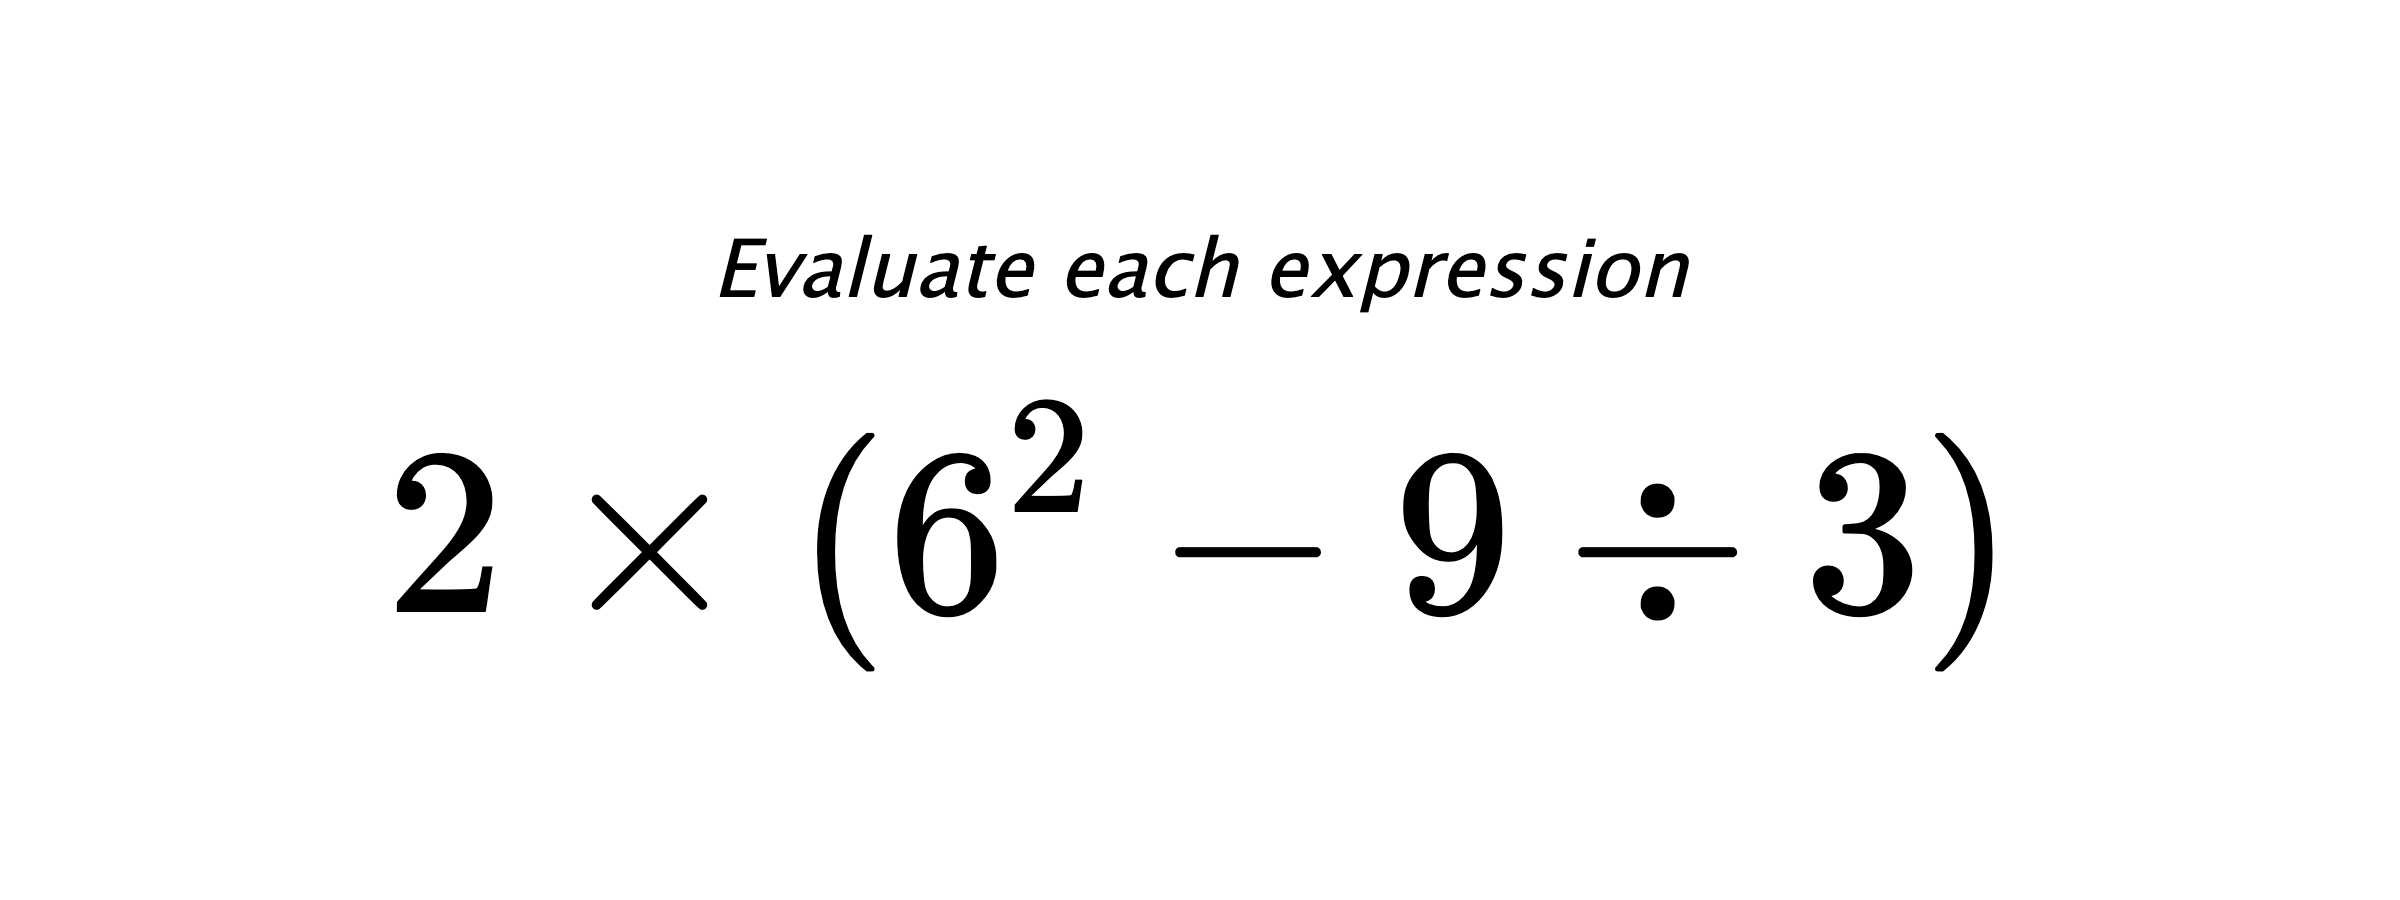 Evaluate each expression $ 2 \times (6^2 - 9 \div 3) $